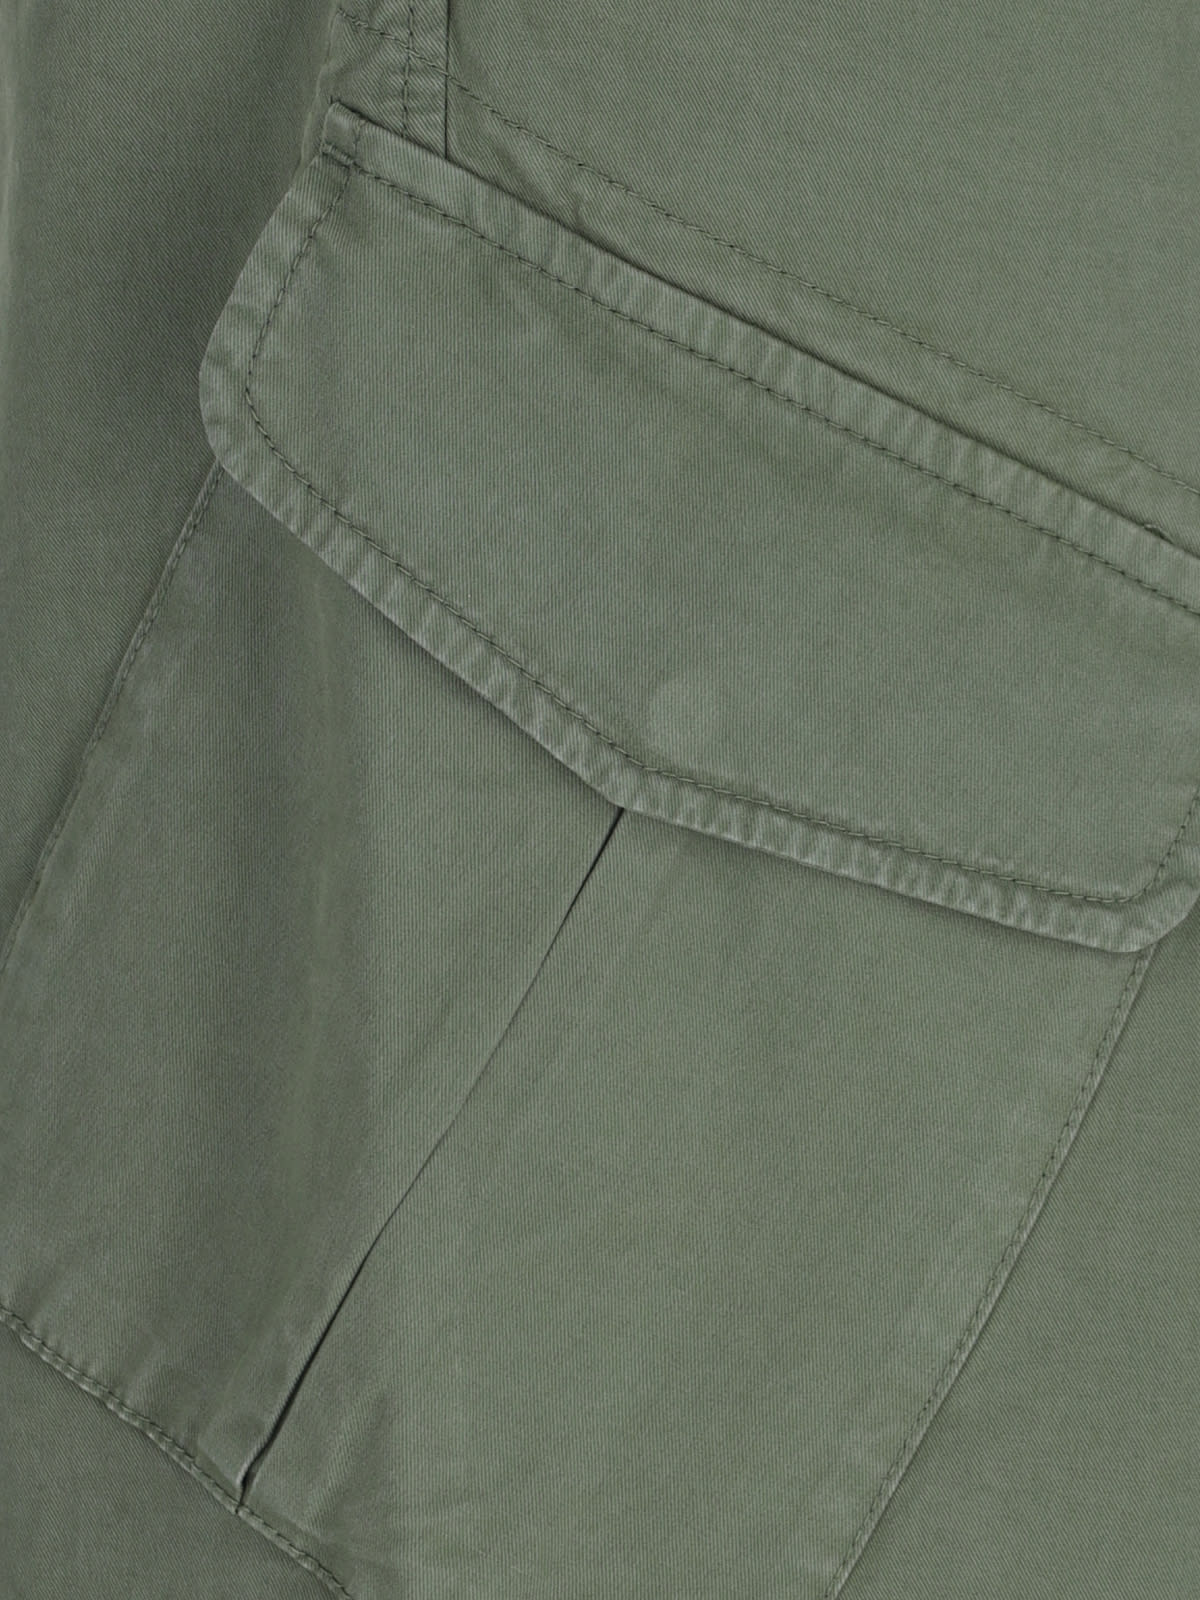 Shop Paul Smith Cargo Trousers In Green